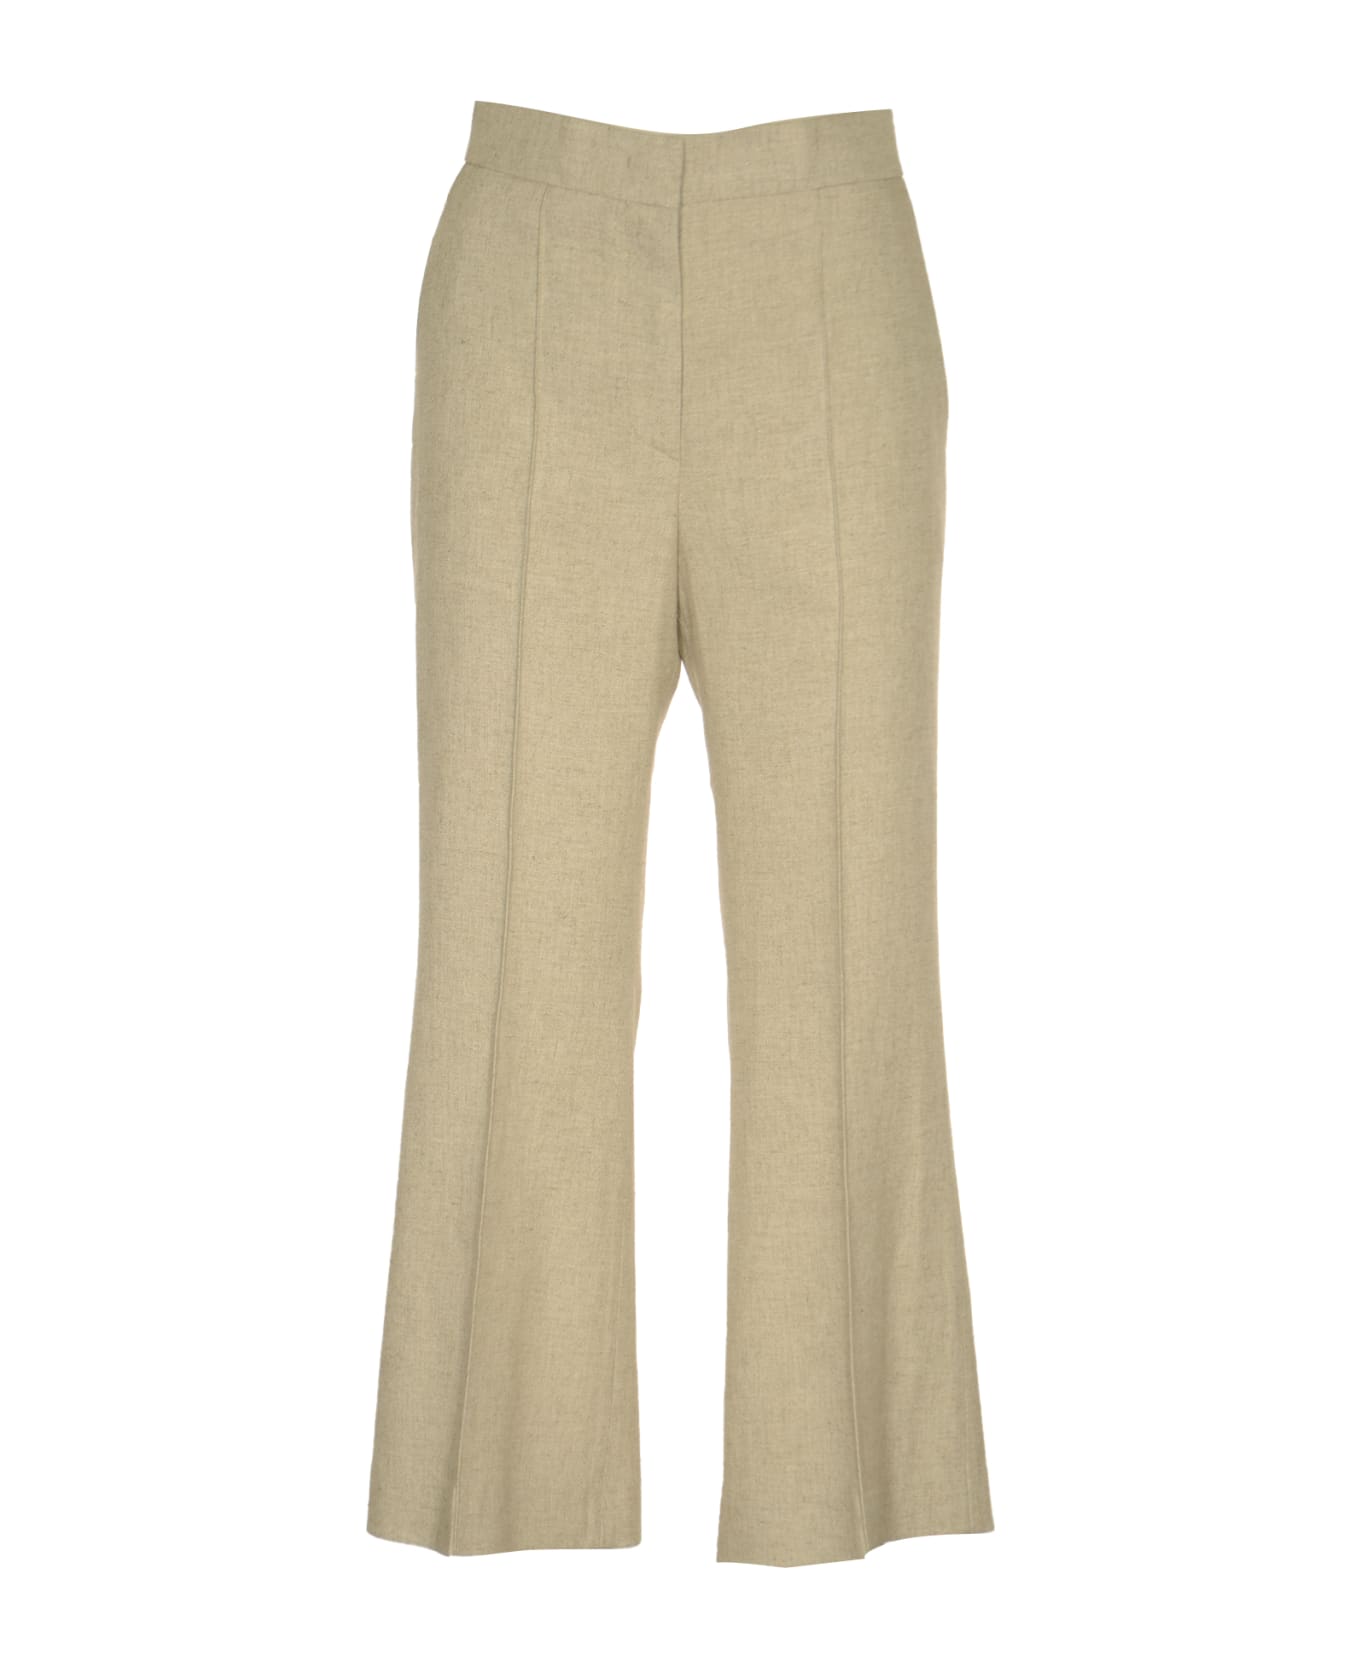 MSGM Classic Concealed Trousers - Beige ボトムス